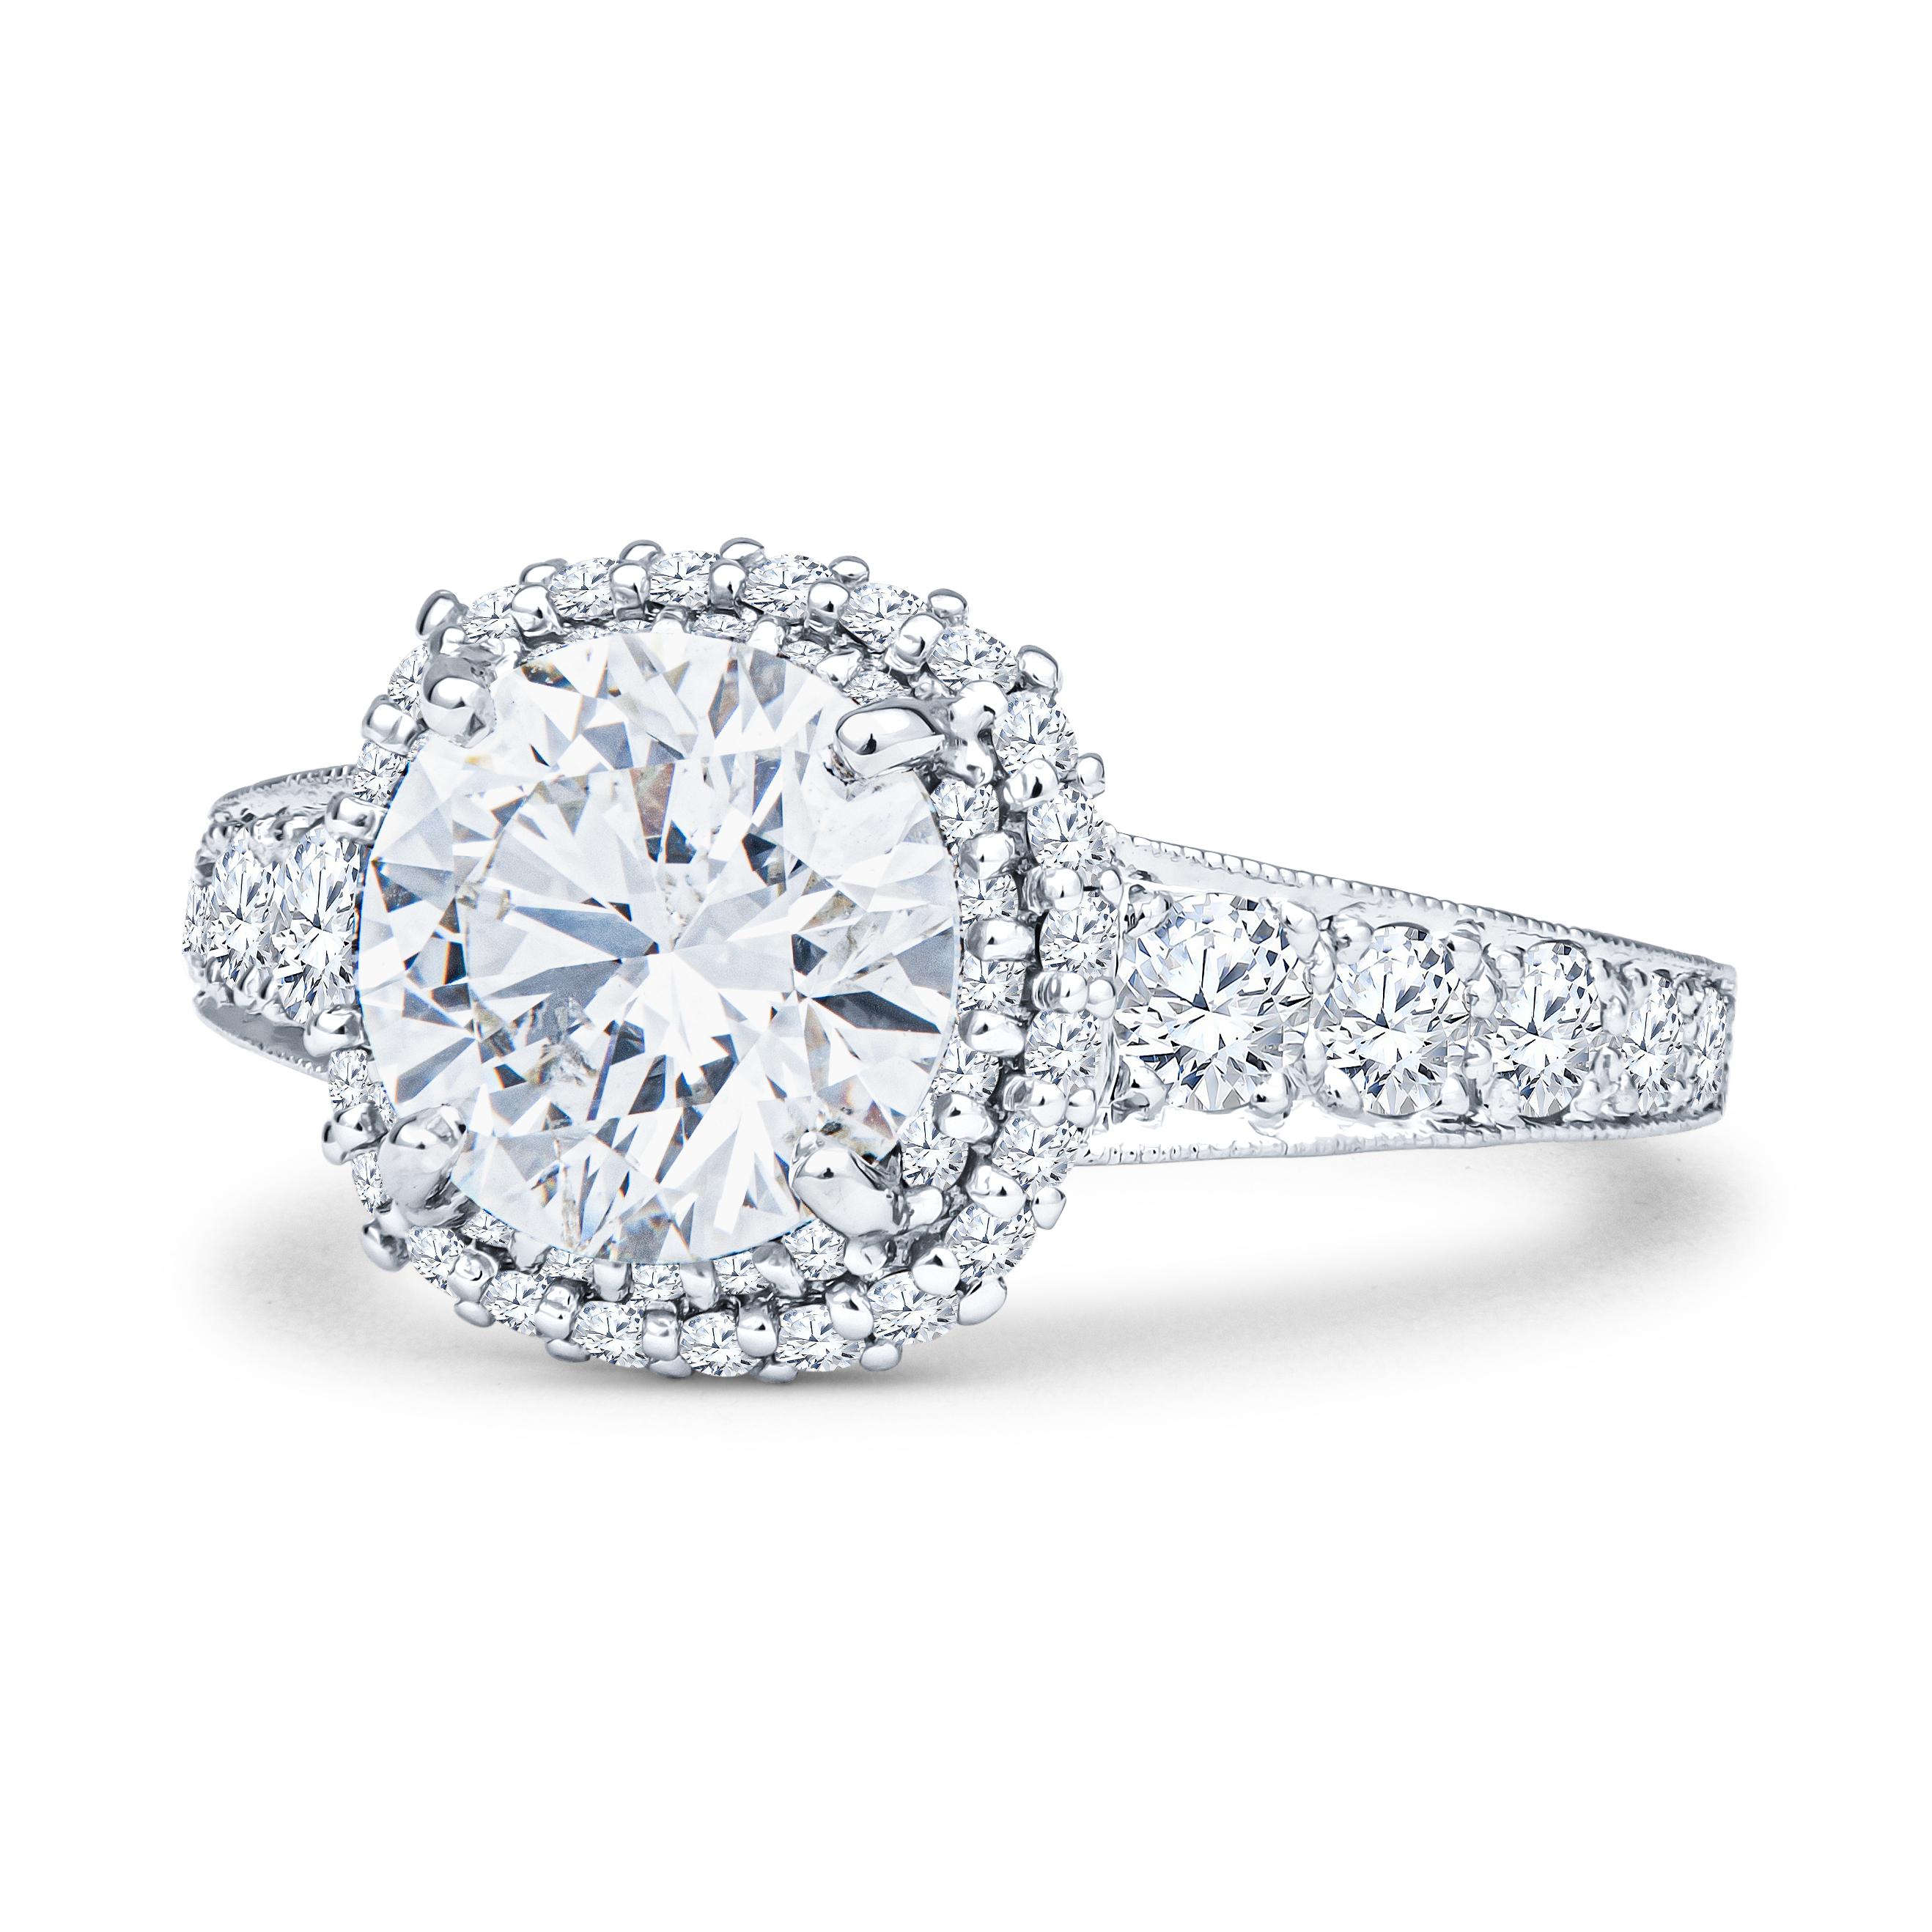 This exquisite, expertly crafted Tacori ring features a 2.01ct round brilliant, K SI2 (HRD 190000126863, inscribed) diamond, set in a platinum Tacori ring, with approximately 0.99ct total weight in round brilliant diamonds tapering down the sides of